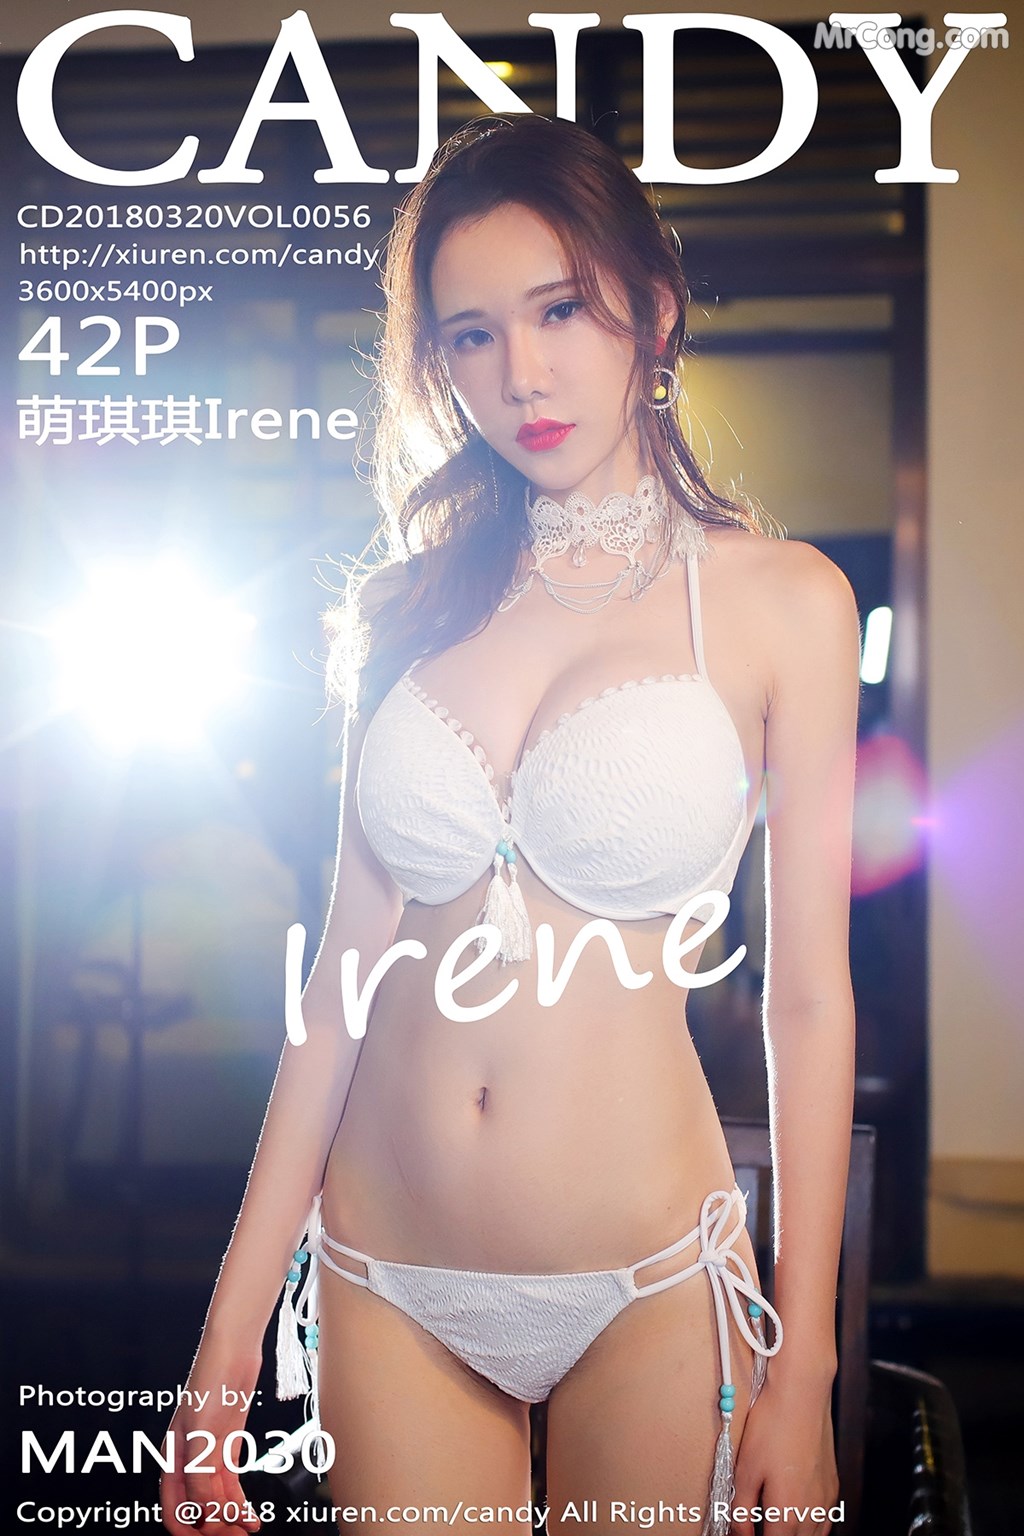 CANDY Vol.056: Irene (萌 琪琪) Model (43 pictures) photo 1-0